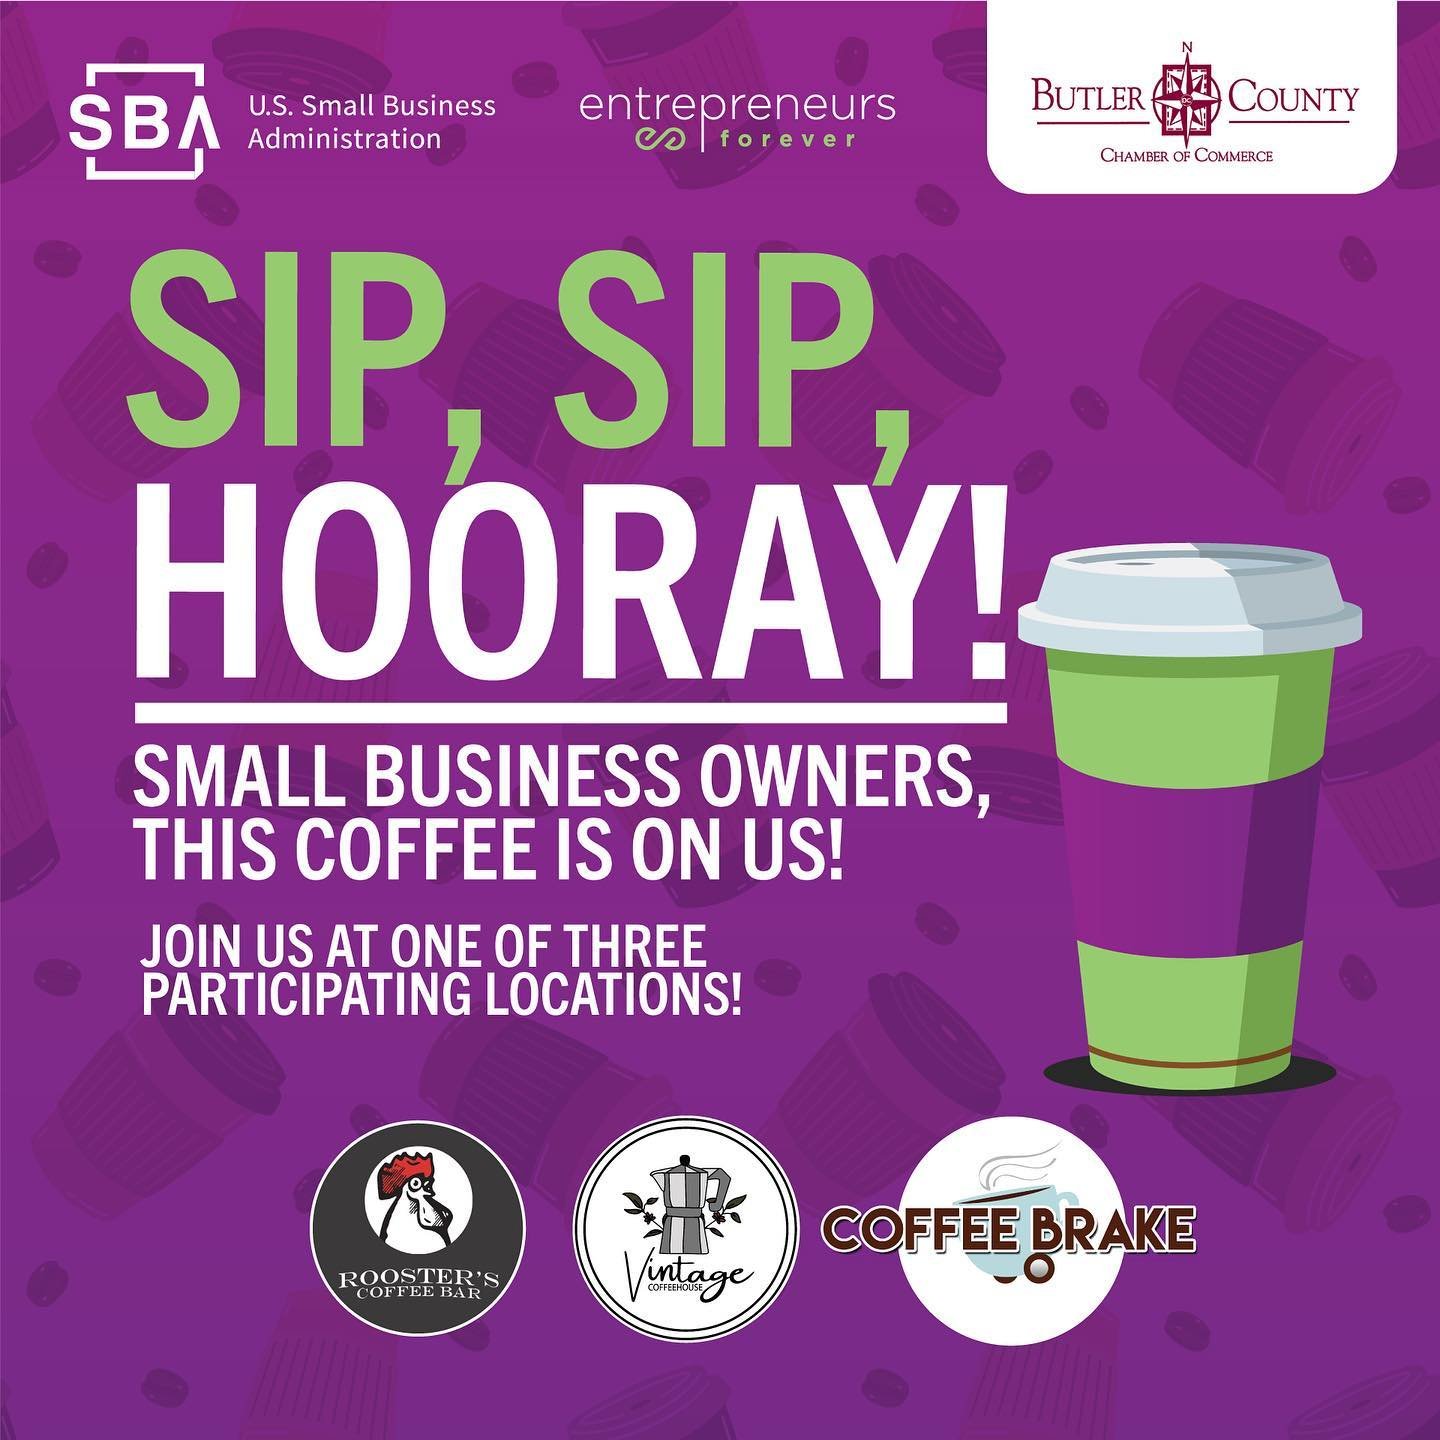 Attention all small business owners in Butler County!  Join us for FREE COFFEE DAY* on May 22 and May 23. 

We understand the challenges of running a small business, so allow us to treat you to a complimentary cup of coffee as a token of appreciation